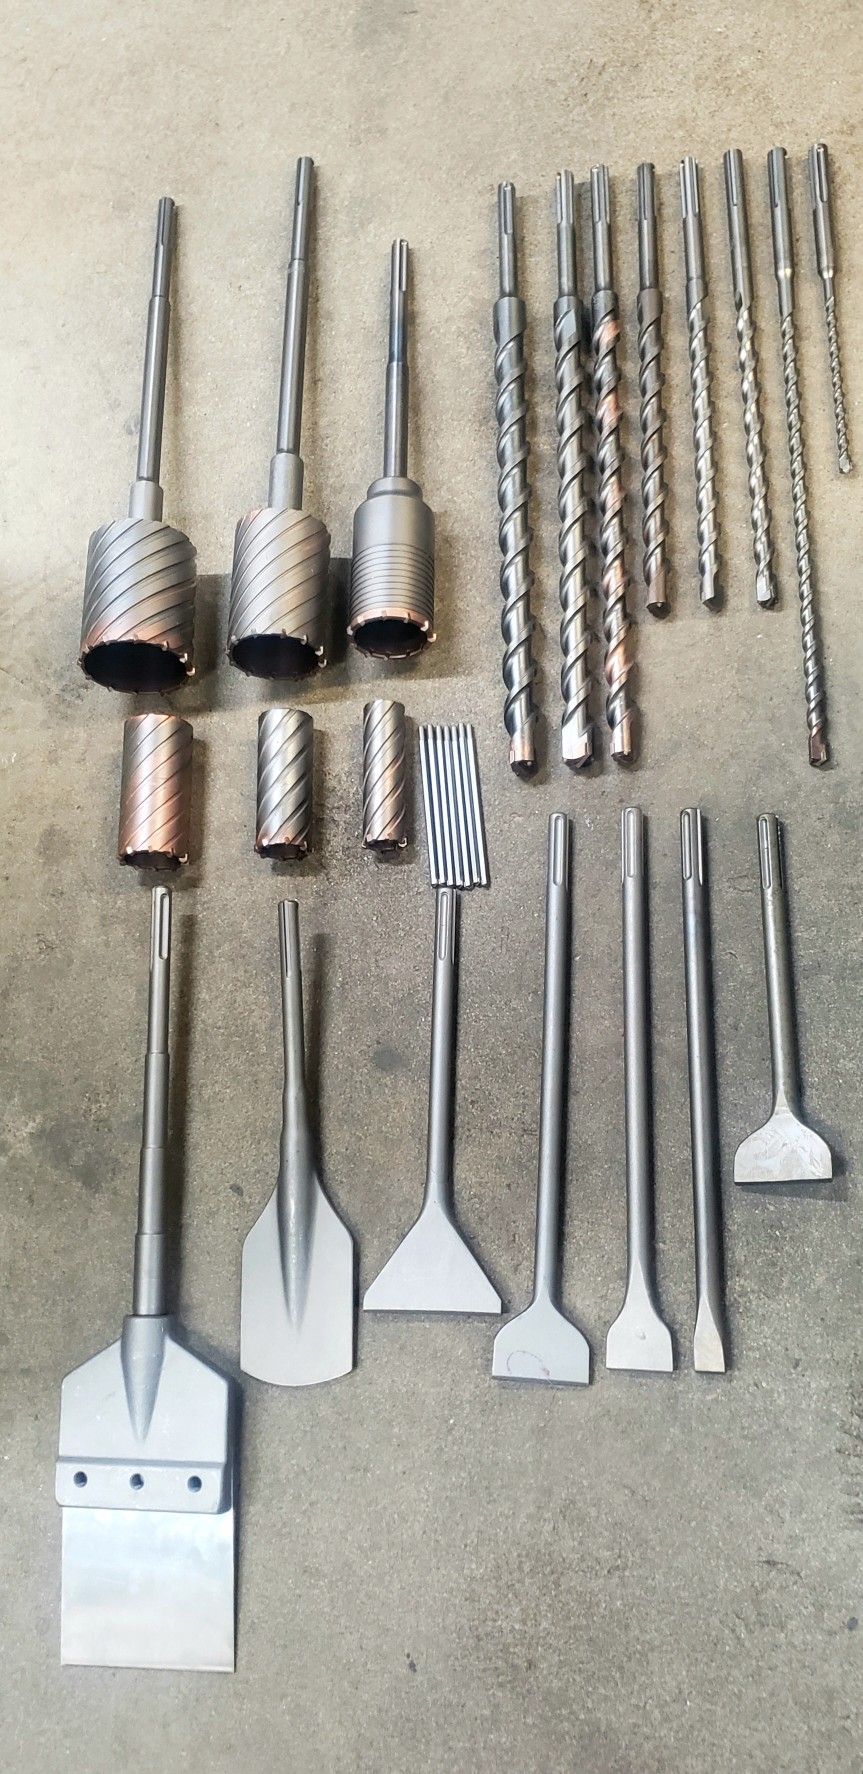 Set  set of 6 coring bits 1-1/2 to 4 inches, 7 SDS MAX drill bits from 3/8 to 1-1/4 and 6  chisels for concrete and tile everything is new